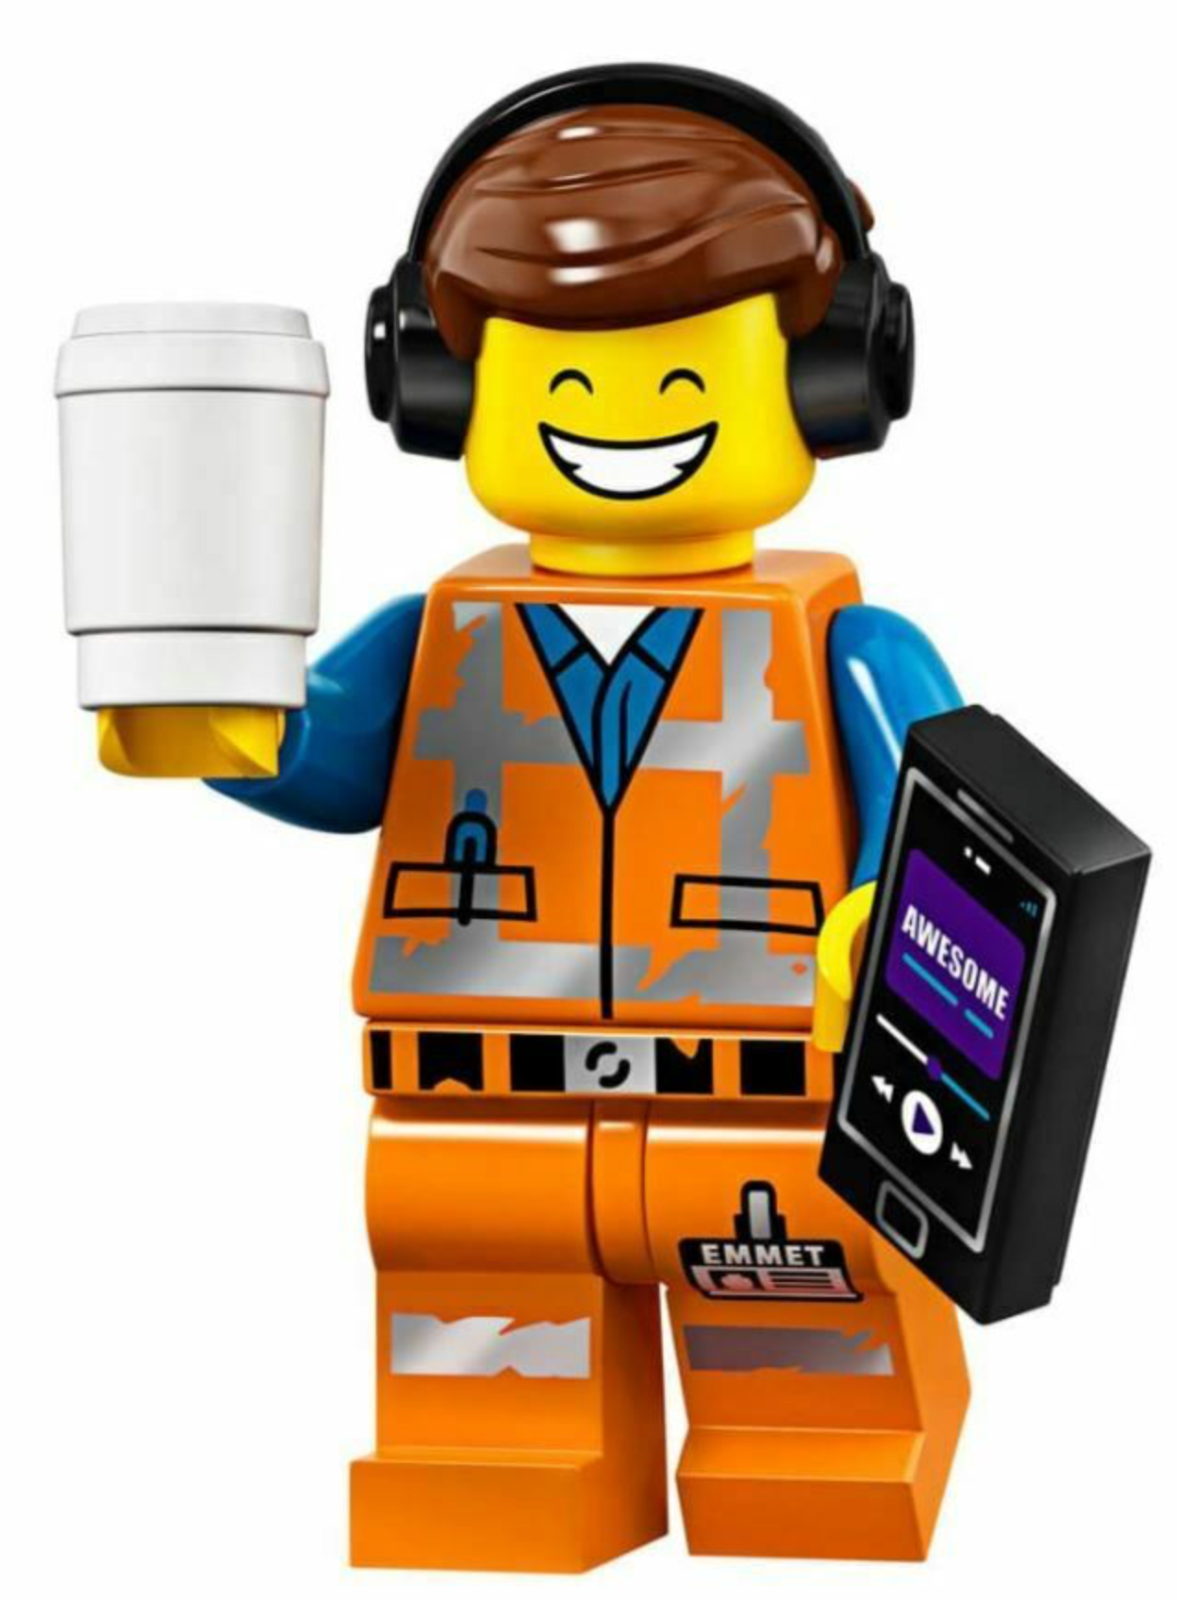 Minifigure:Awesome Remix Emmet Movie 2:LEGO NEW MOVIE 2 SERIES MINIFIGURES 71023 WIZARD OF OZ MINIFIGS YOU PICK FIGURES